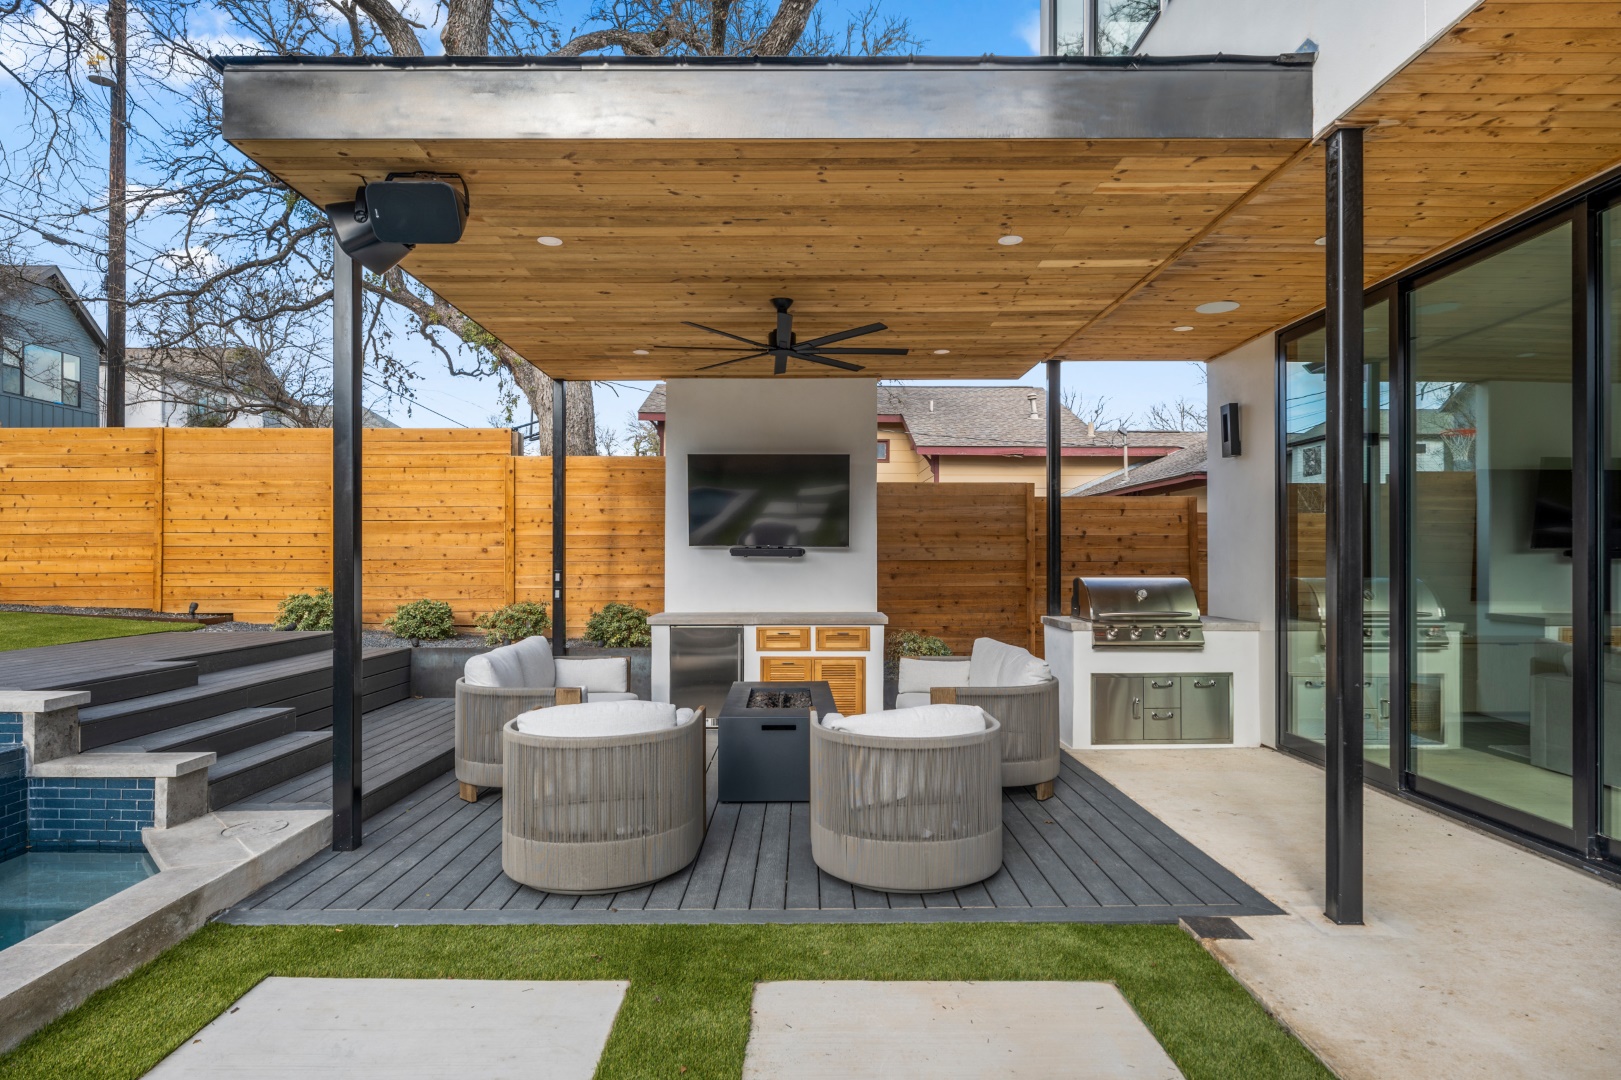 20 Contemporary Patio Designs That Redefine Outdoor Comfort and Elegance